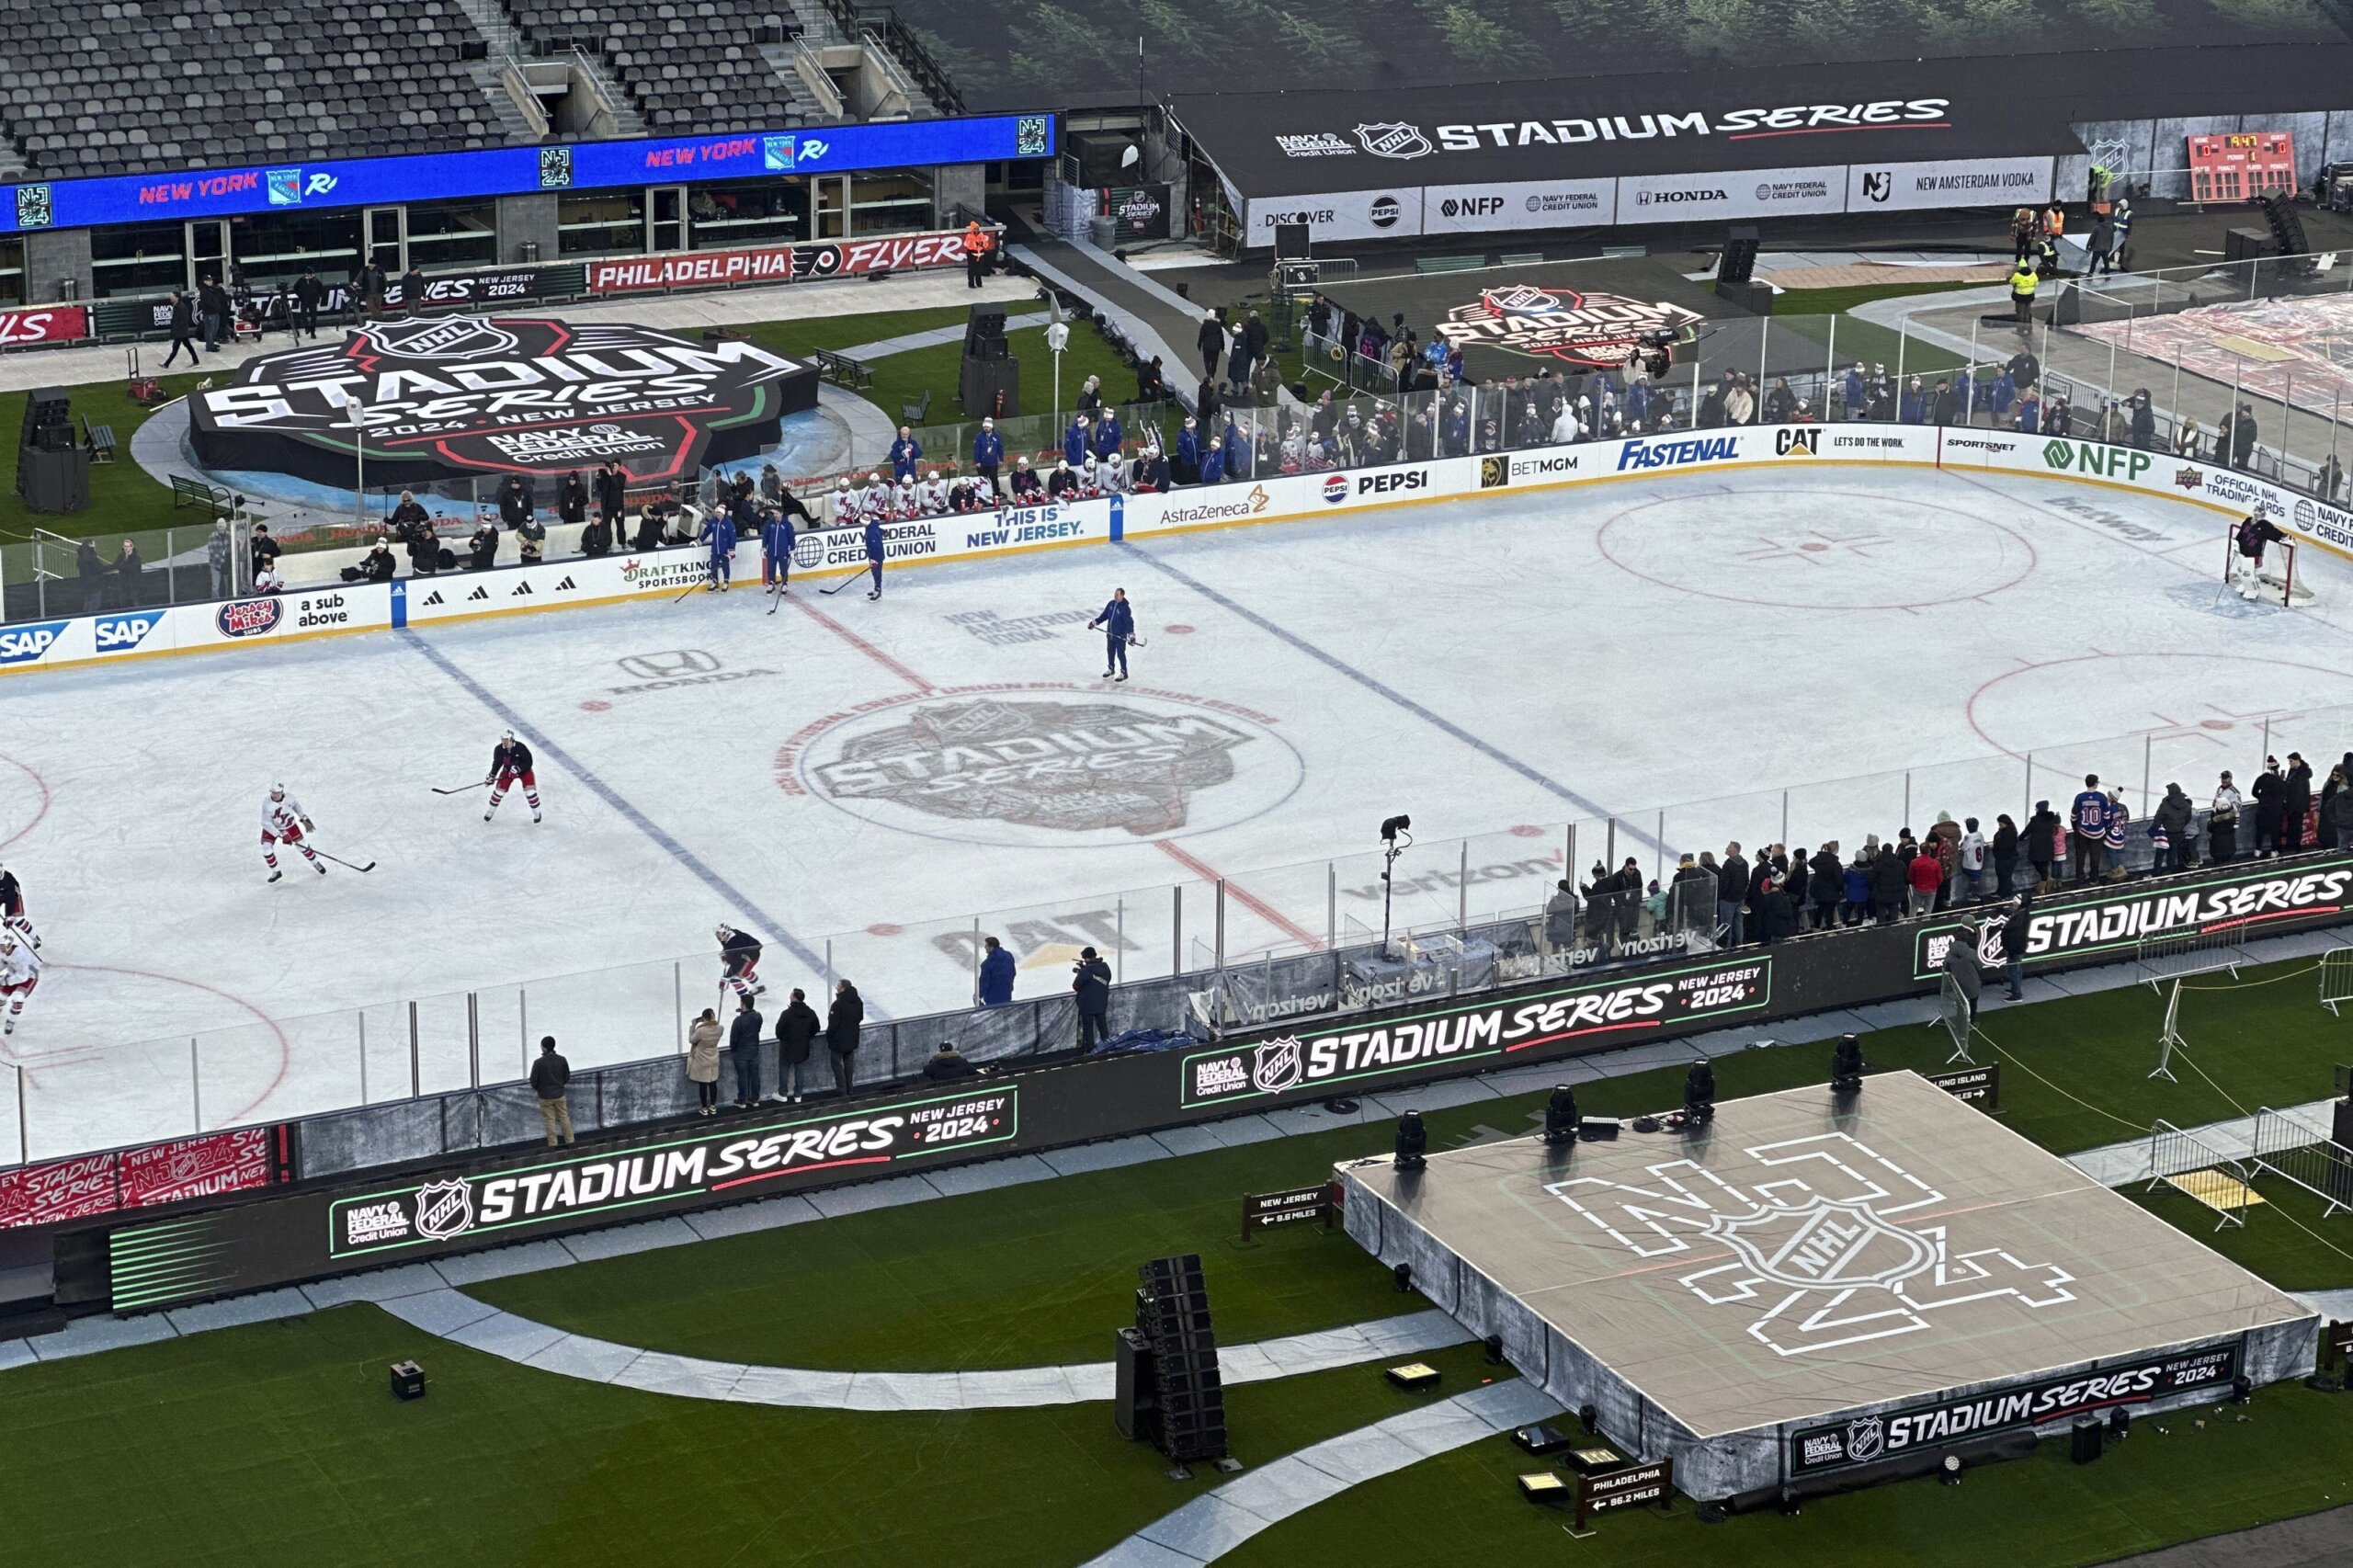 Flyers, Rangers, Devils test the ice at MetLife Stadium in practices